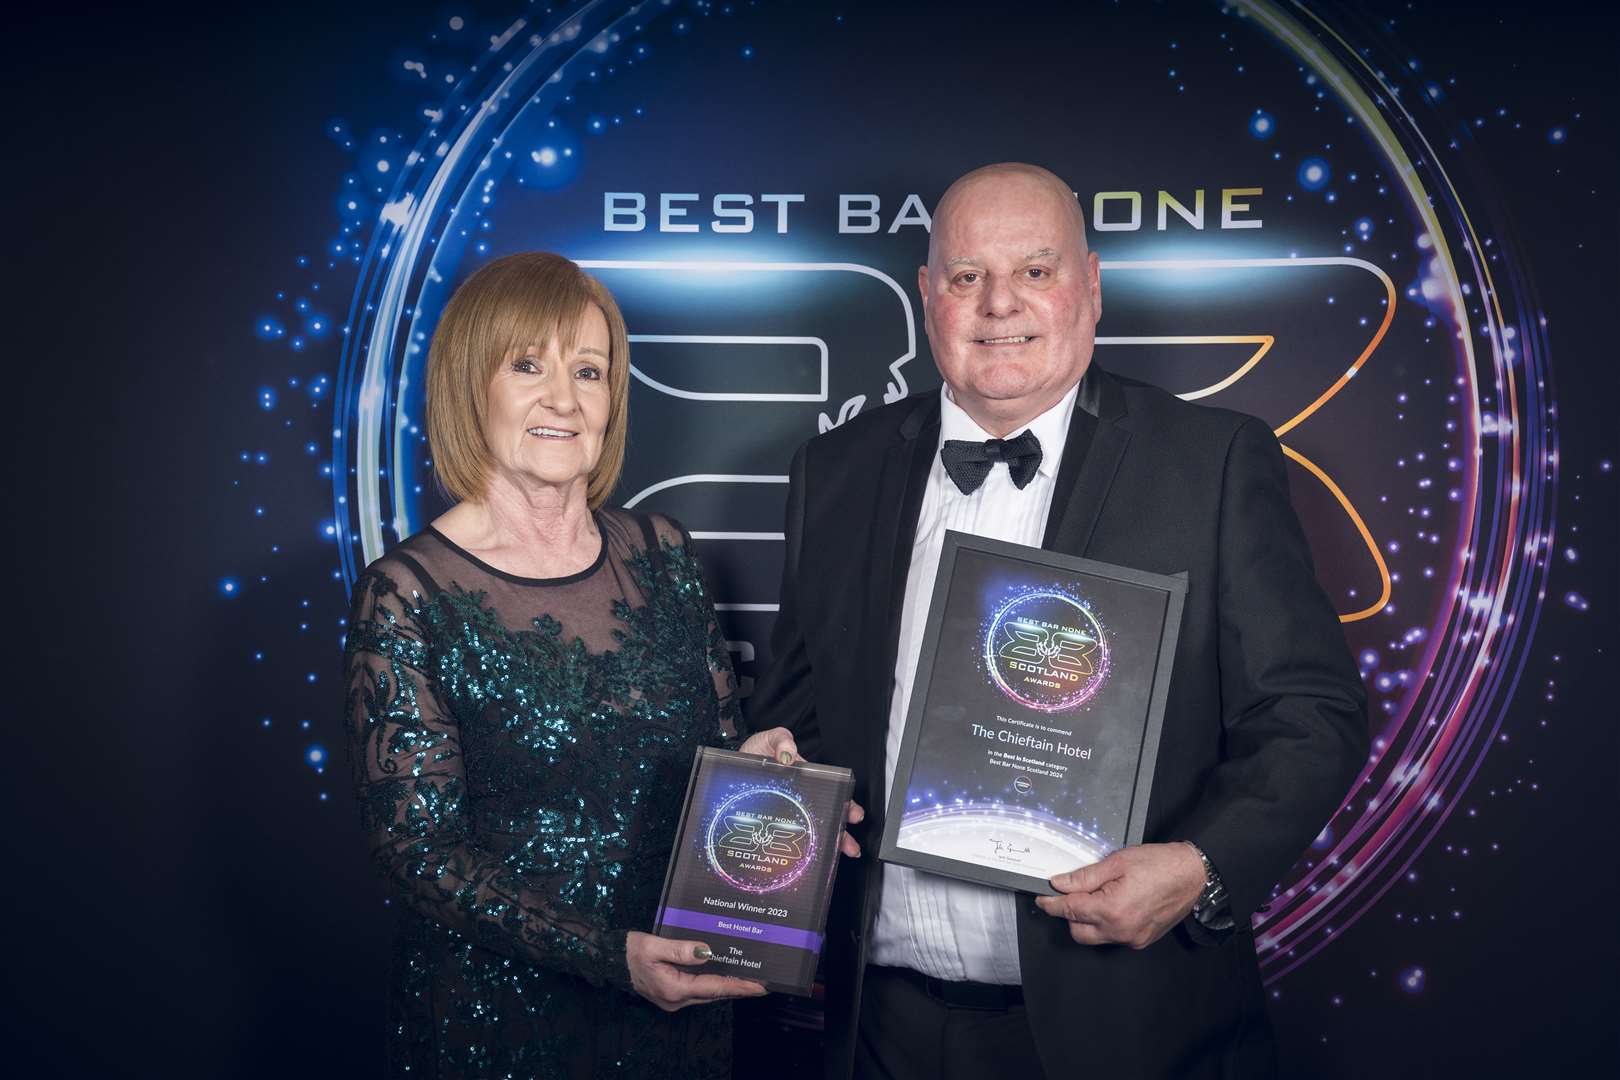 Liz Lawson, of The Chieftain, collects the award for Best Hotel Bar at the Best Bar None Scotland Awards.